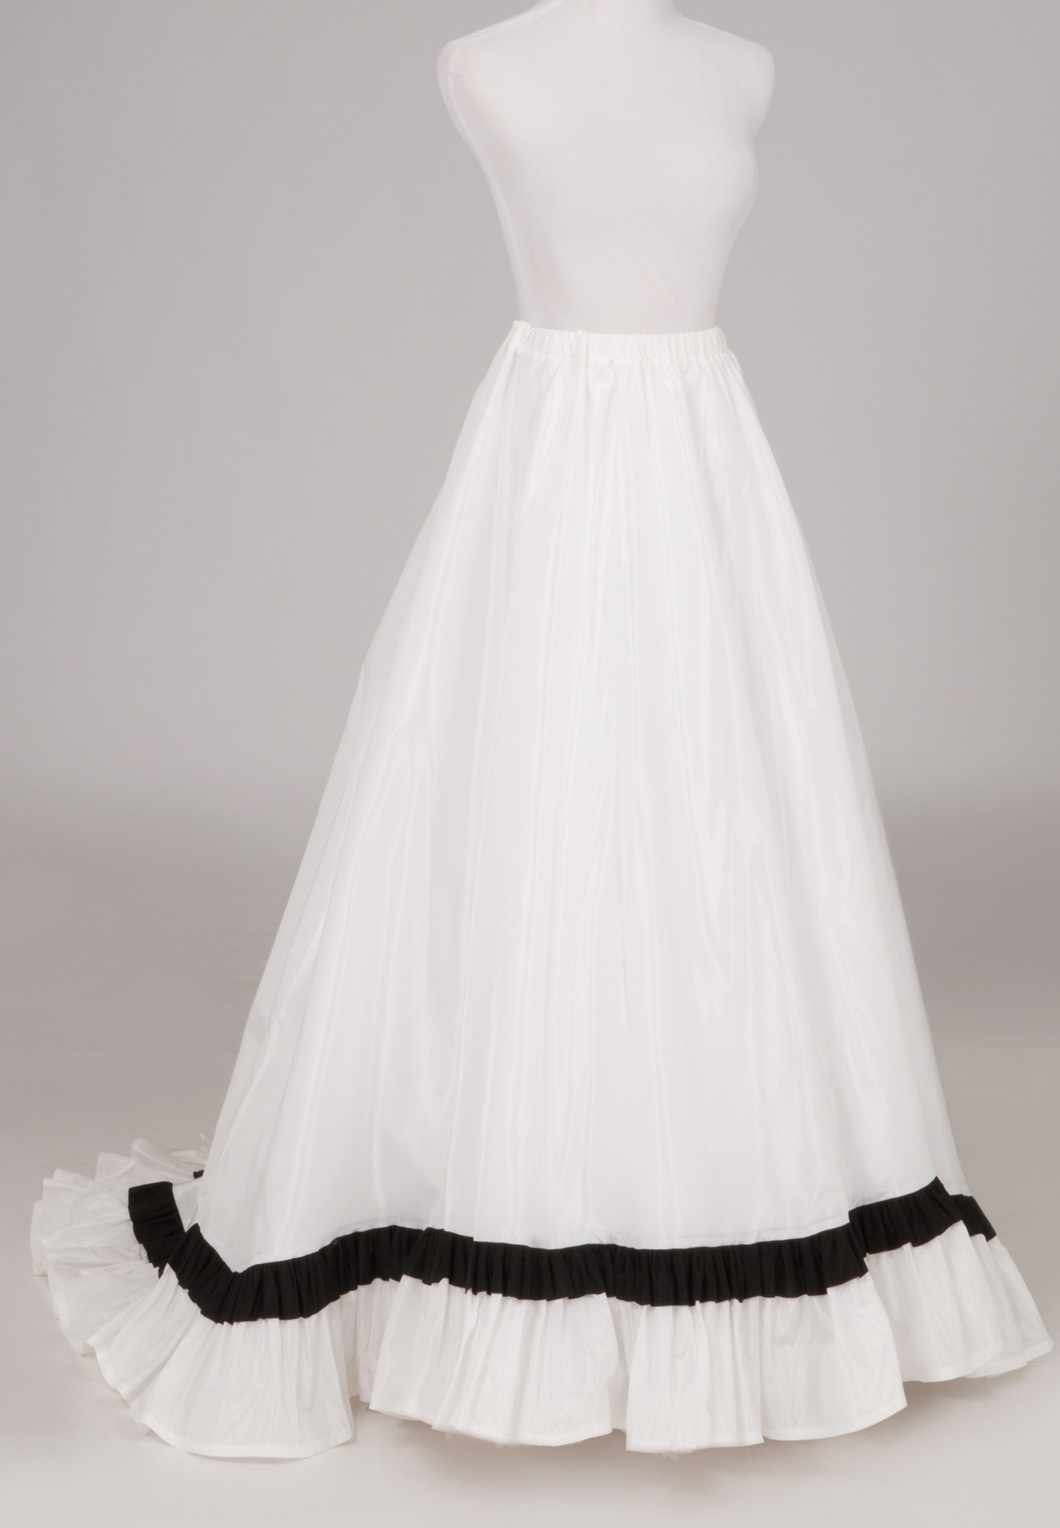 Victorian Trained Skirt | Recollections